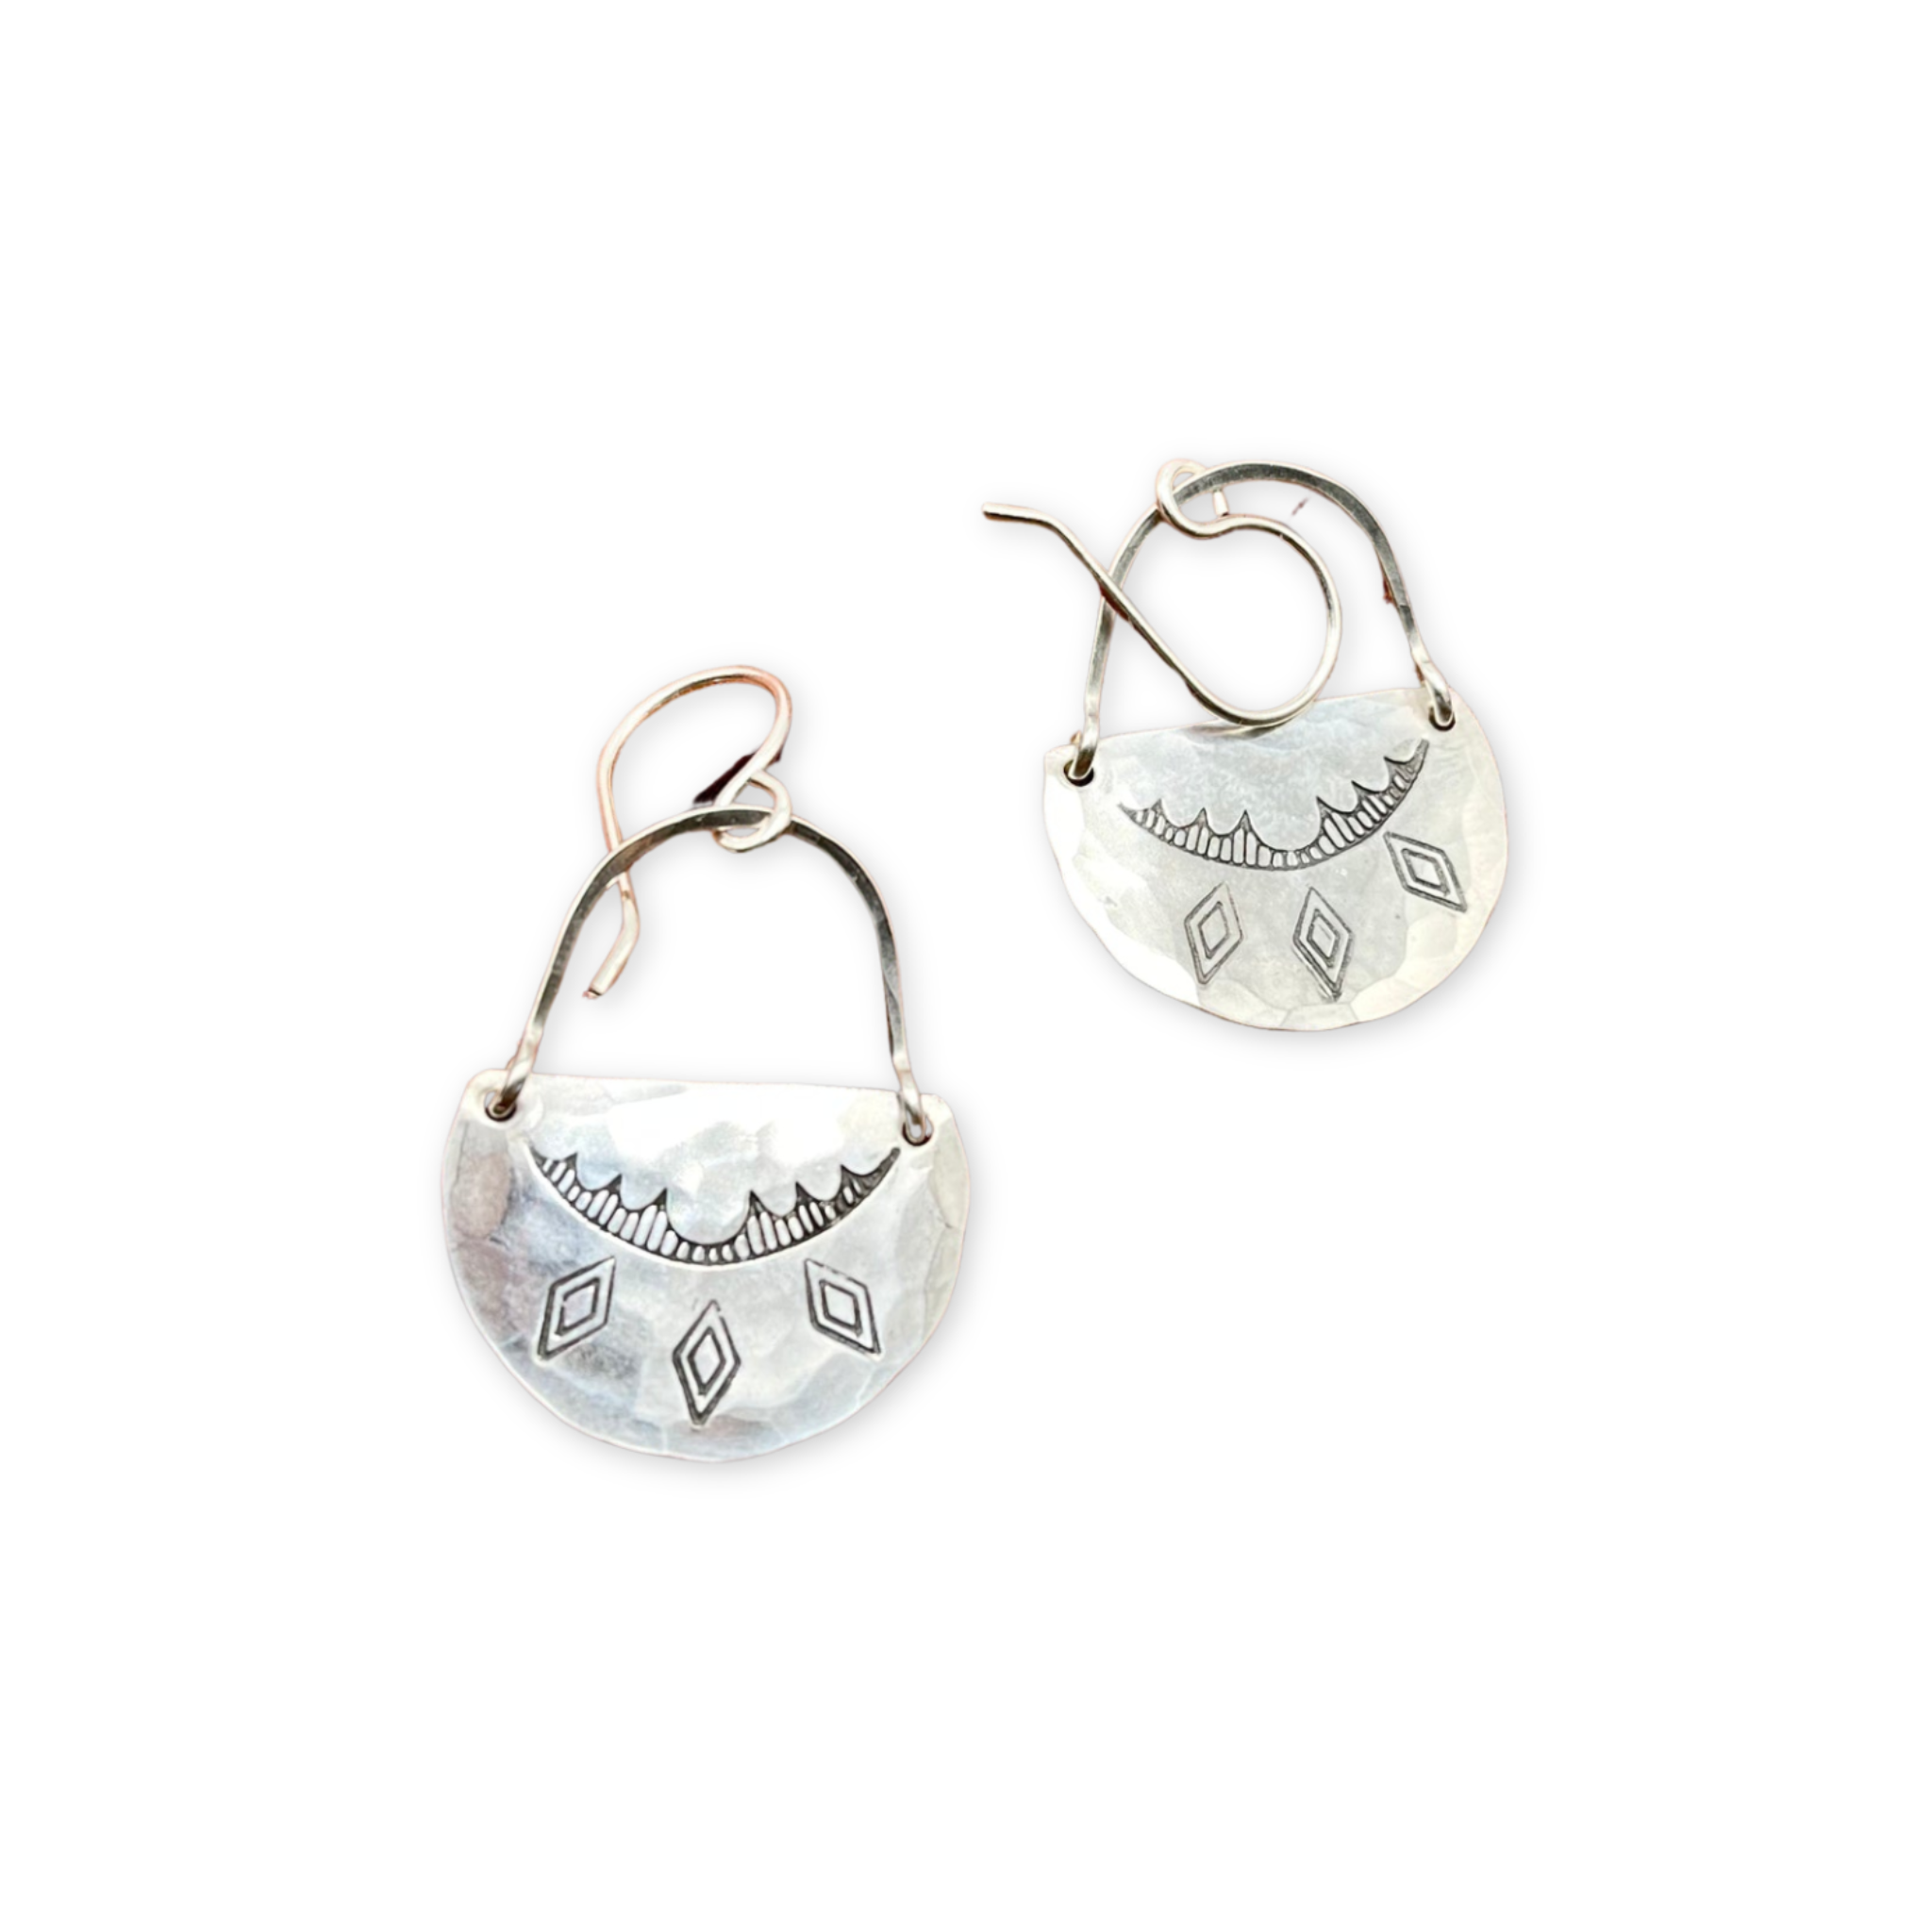 earrings featuring hand stamped pendants hanging from hand forged arches